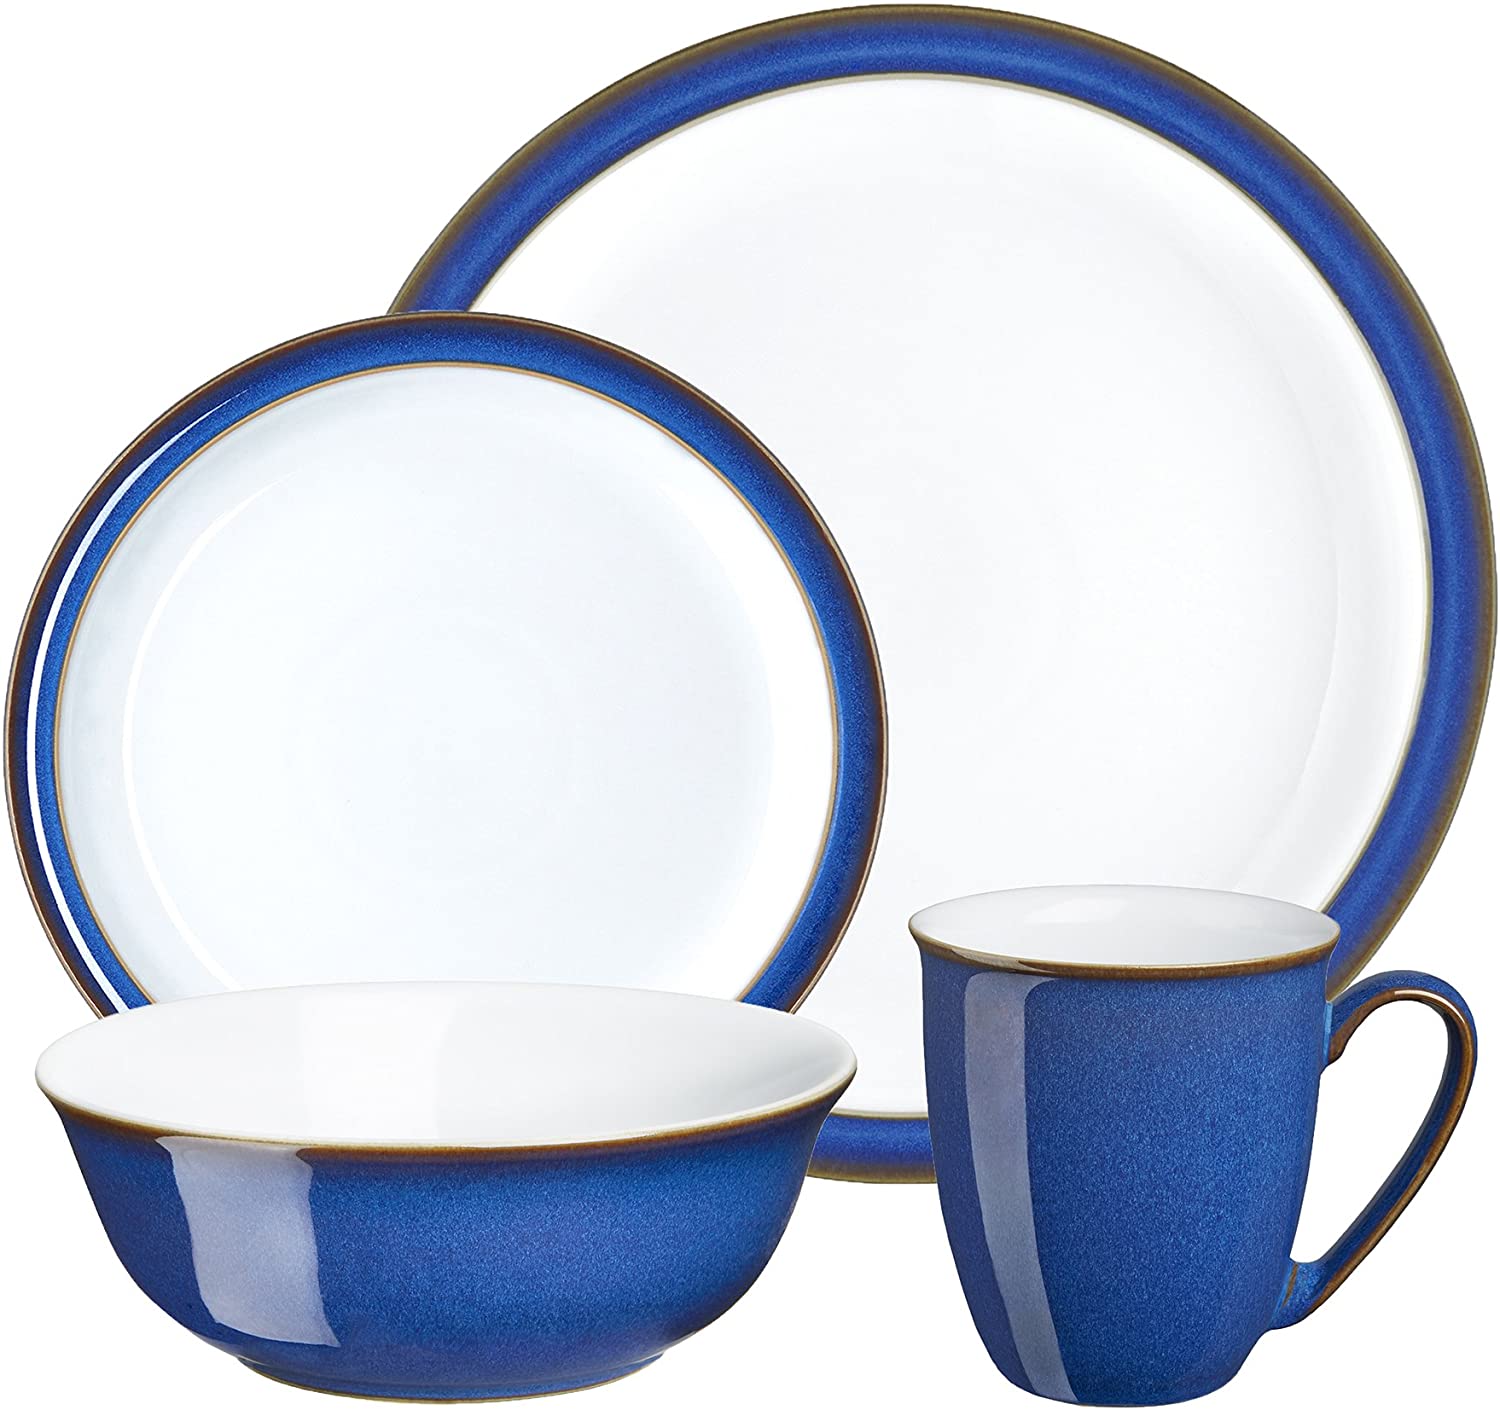 Denby Imperial Blue 16 Piece Boxed Tableware Set